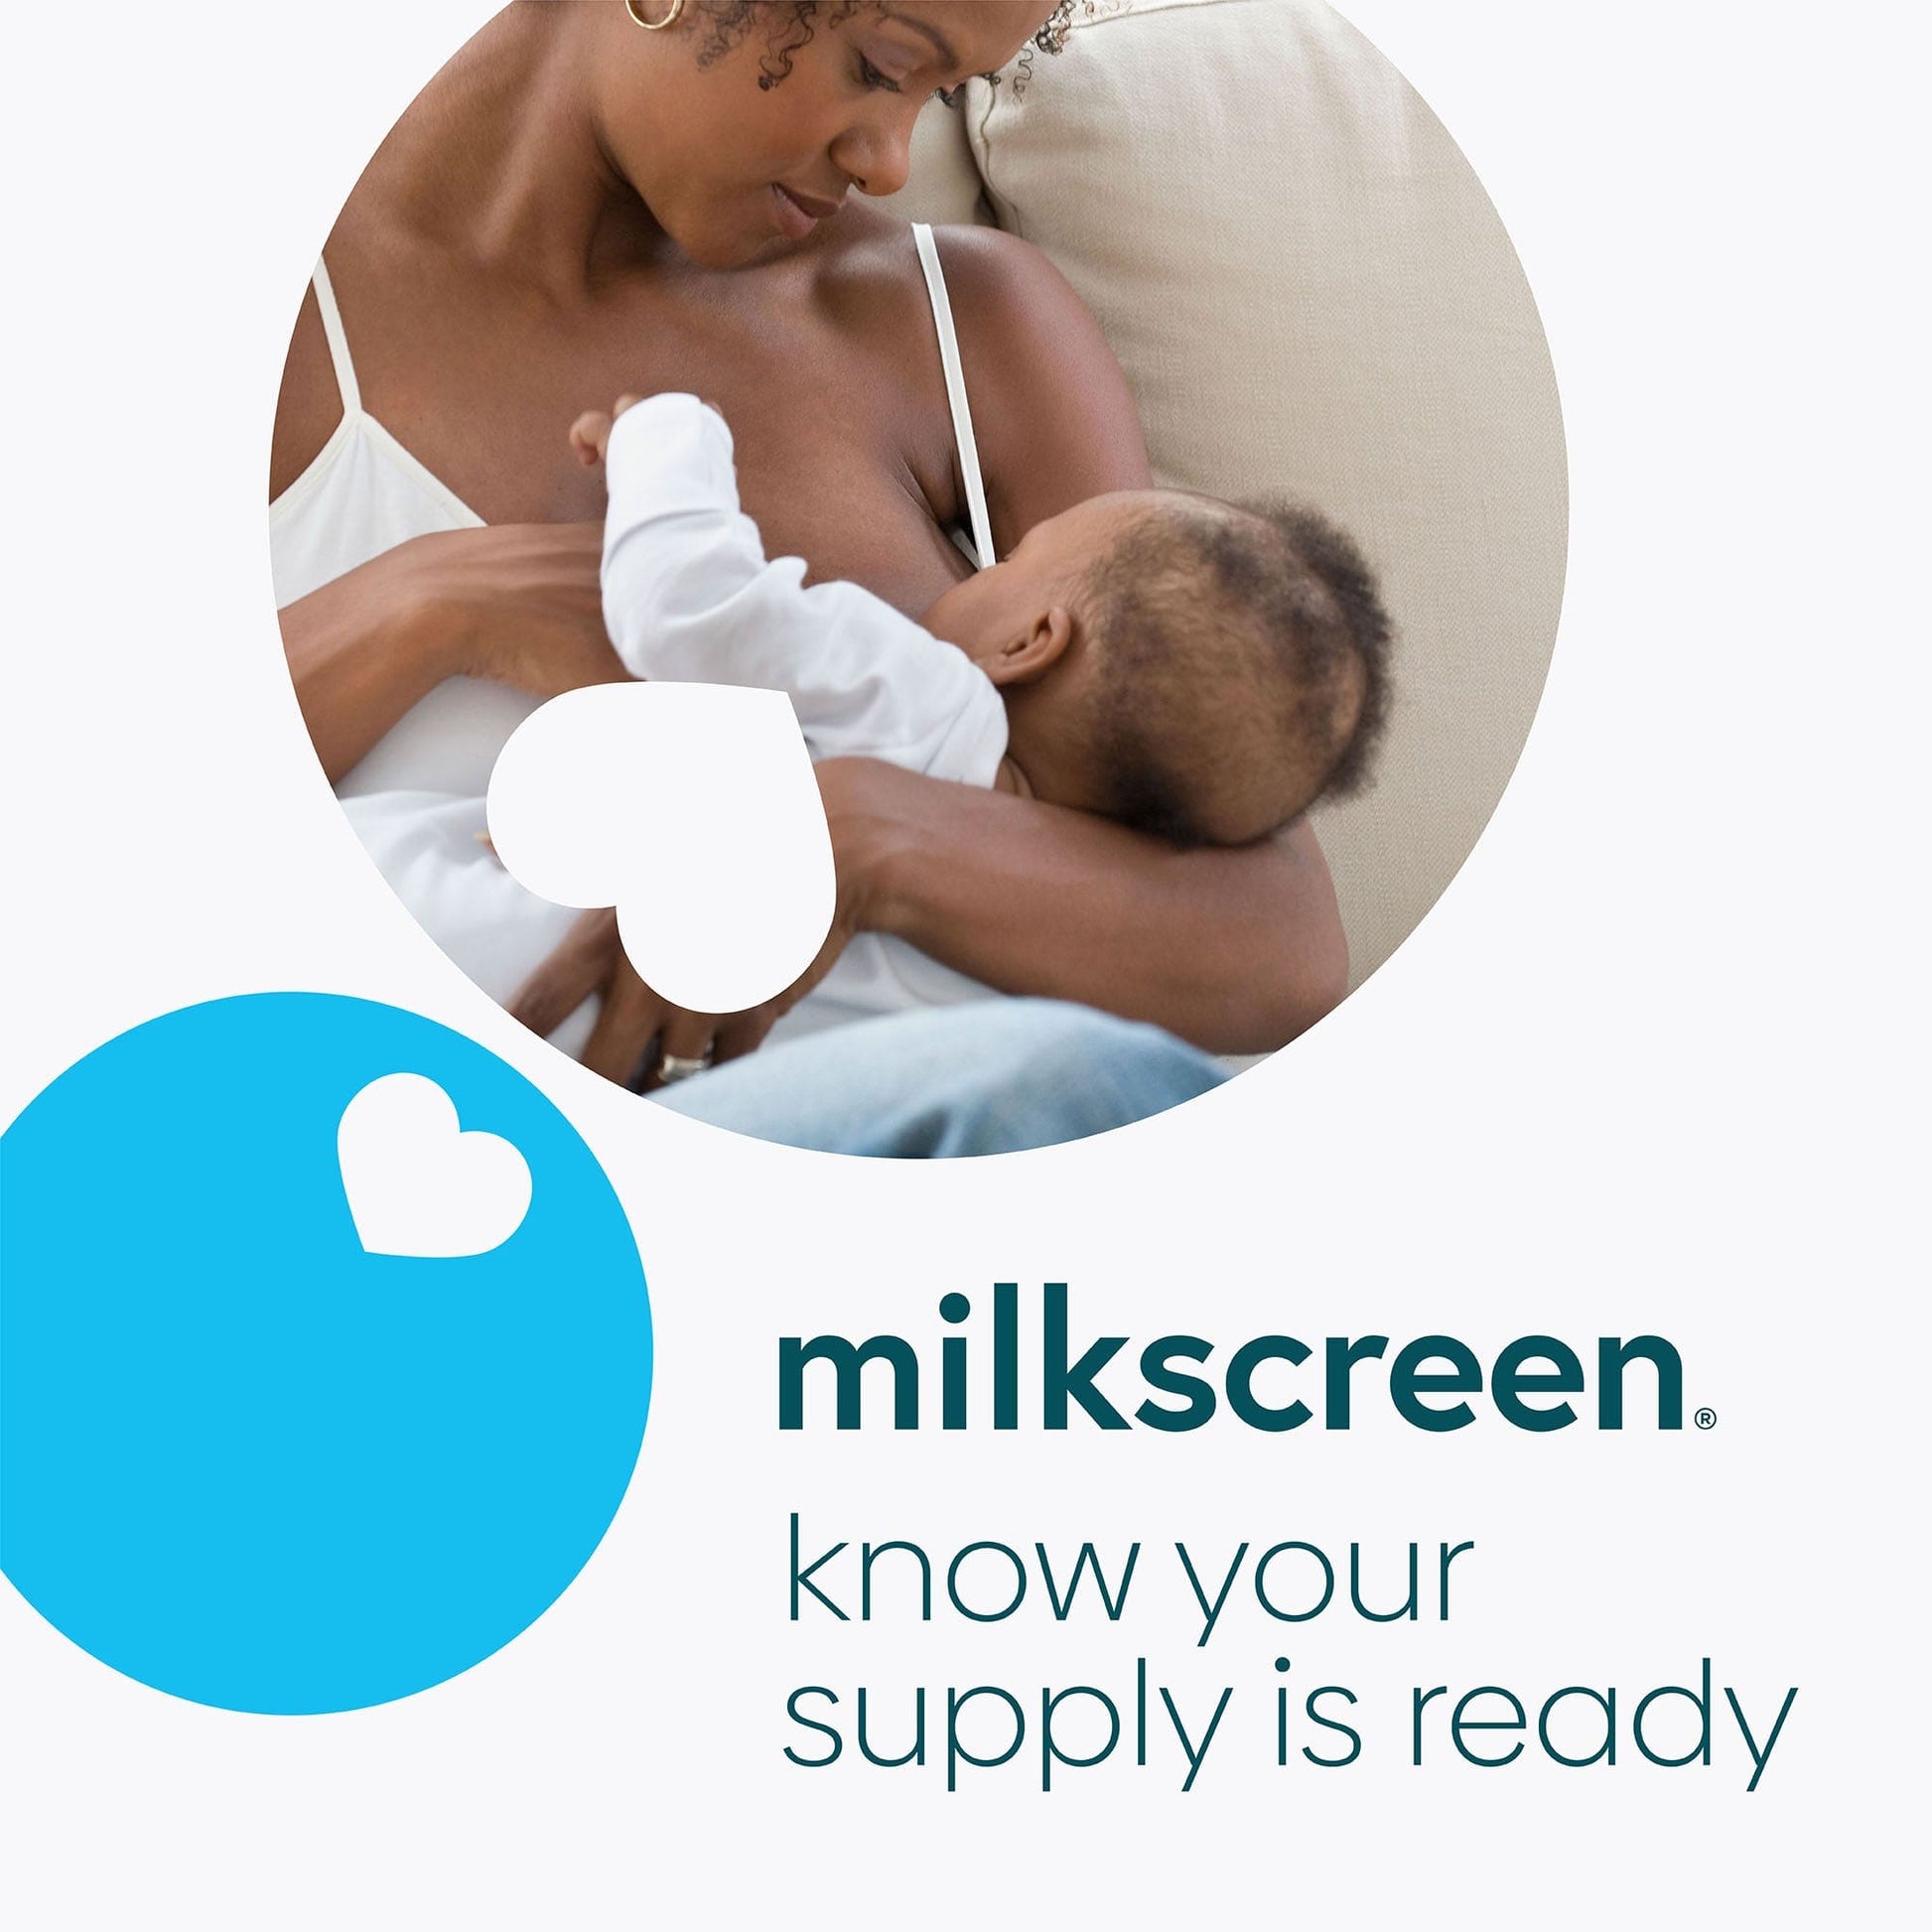 Upspring Milkscreen Test Strips To Detect Alcohol In Breast Milk - At-Home  Test For Breastfeeding Moms, Simple Breast Milk Alcohol Dip Test With Accu  - Imported Products from USA - iBhejo